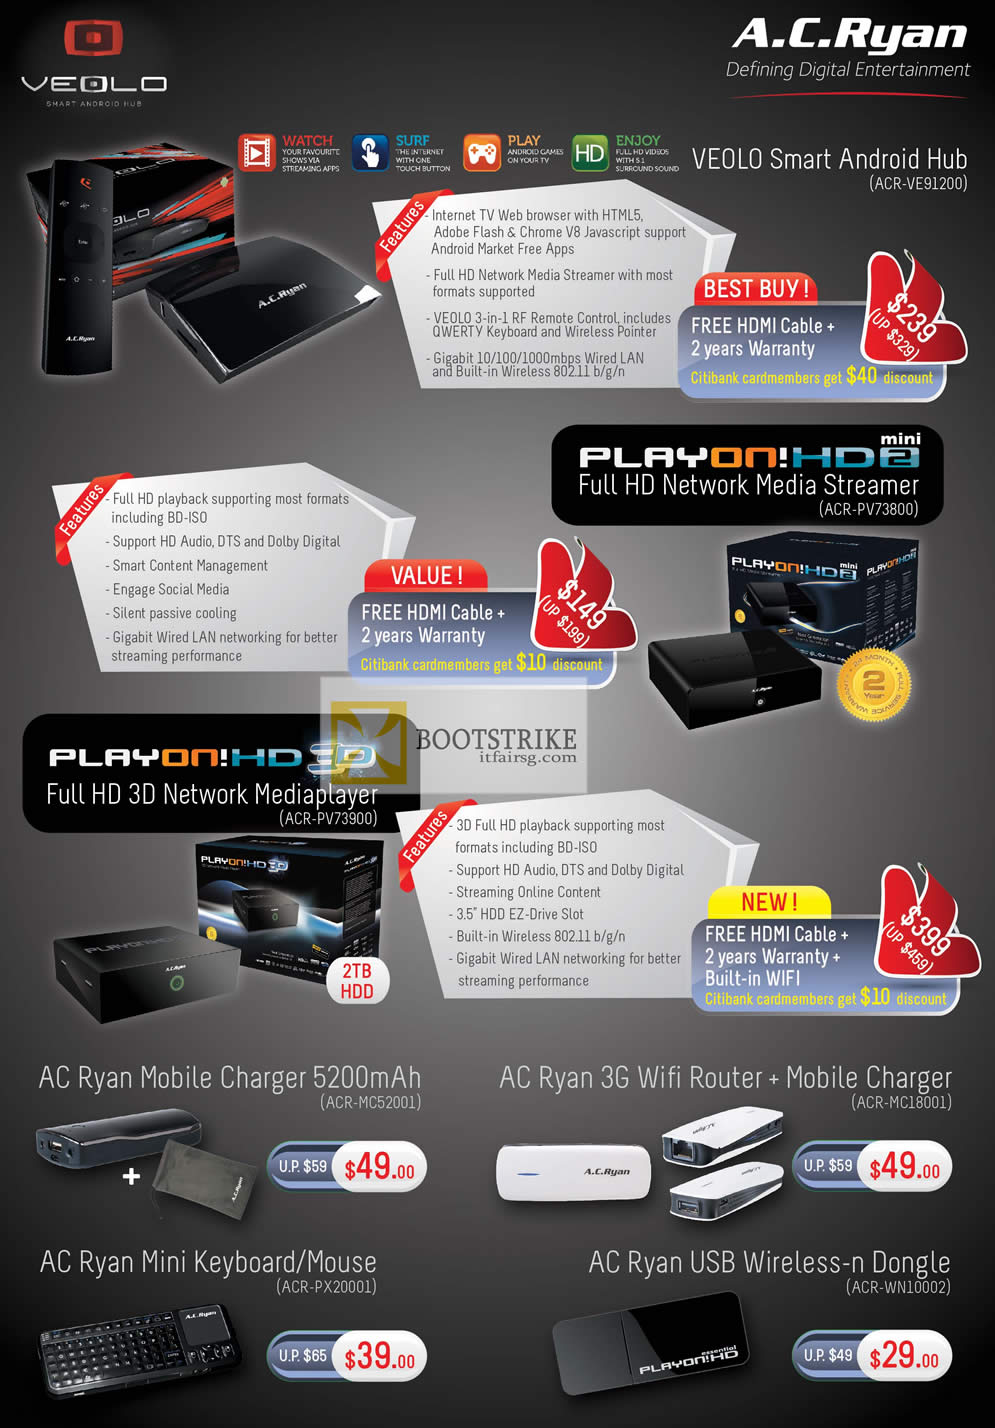 COMEX 2012 price list image brochure of AC Ryan Veolo Smart Android Hub Media Player ACR-VE91200, PlayOn HD2 Mini ACR-PV73800, PlayOn HD 3D ACR-PV73900, Accessories